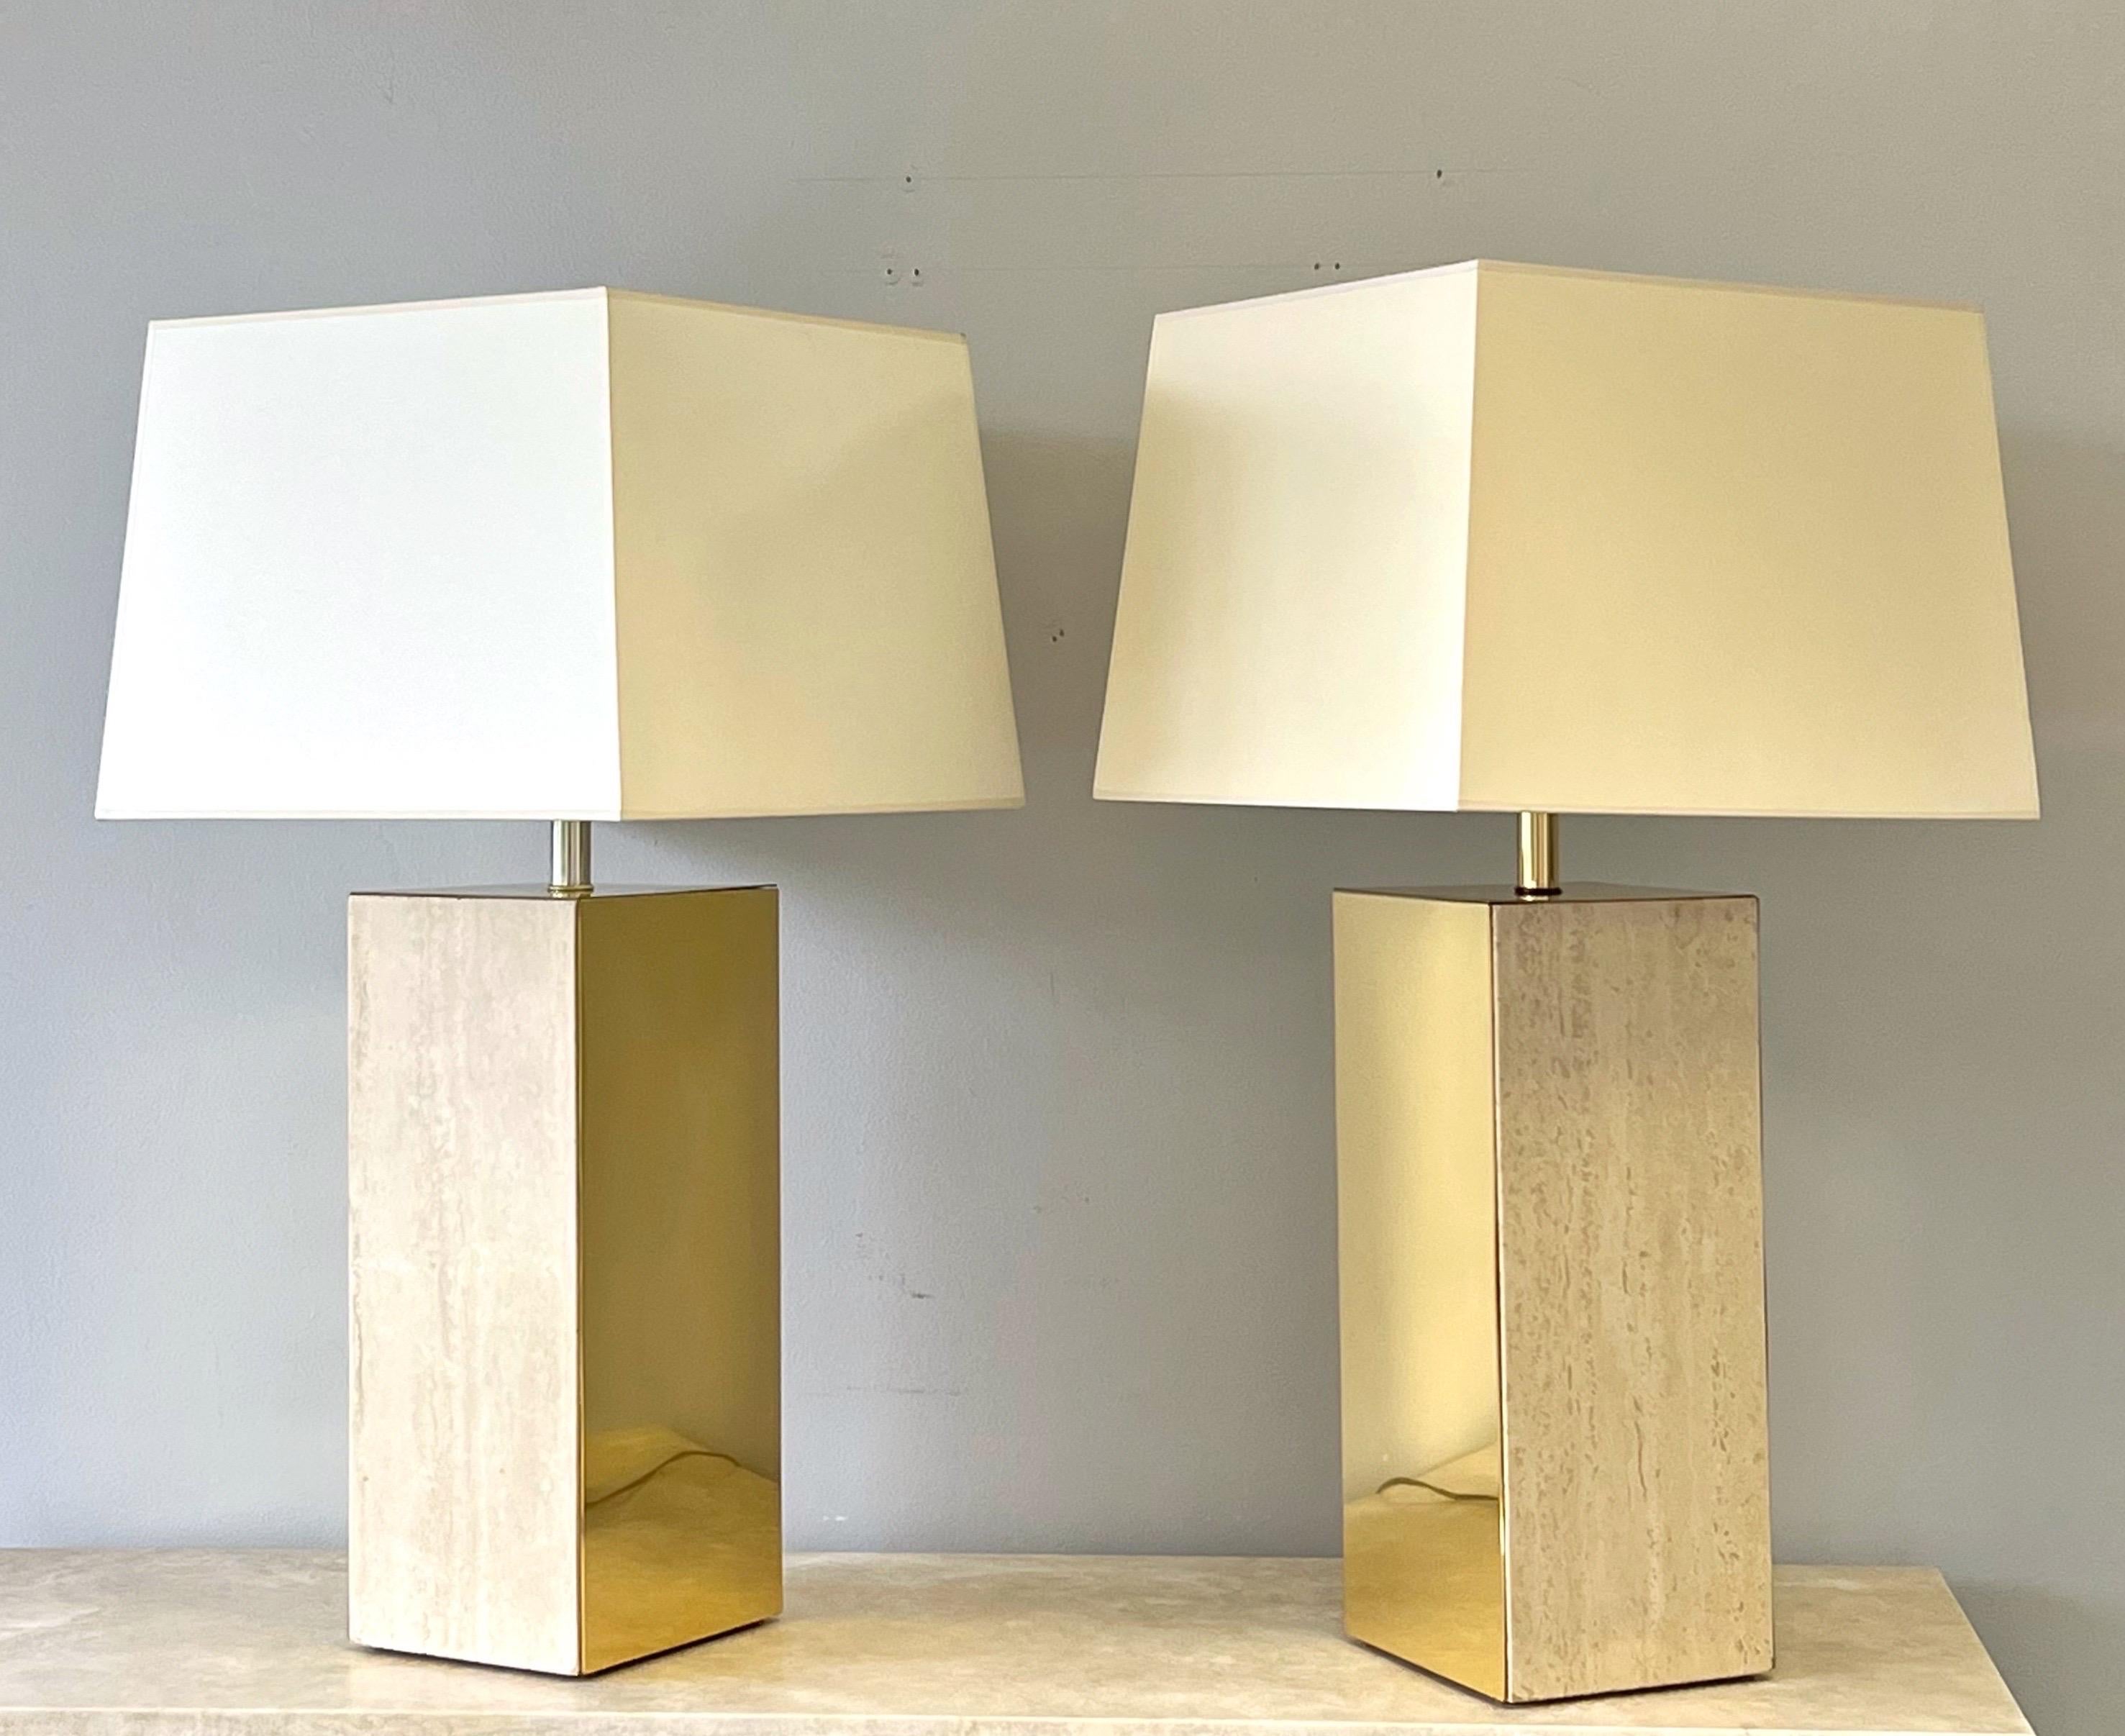 A pair of large brass and travertine table lamps. The bases are 7” by 8” by 18” tall. Very clean modern lines and proportions. 